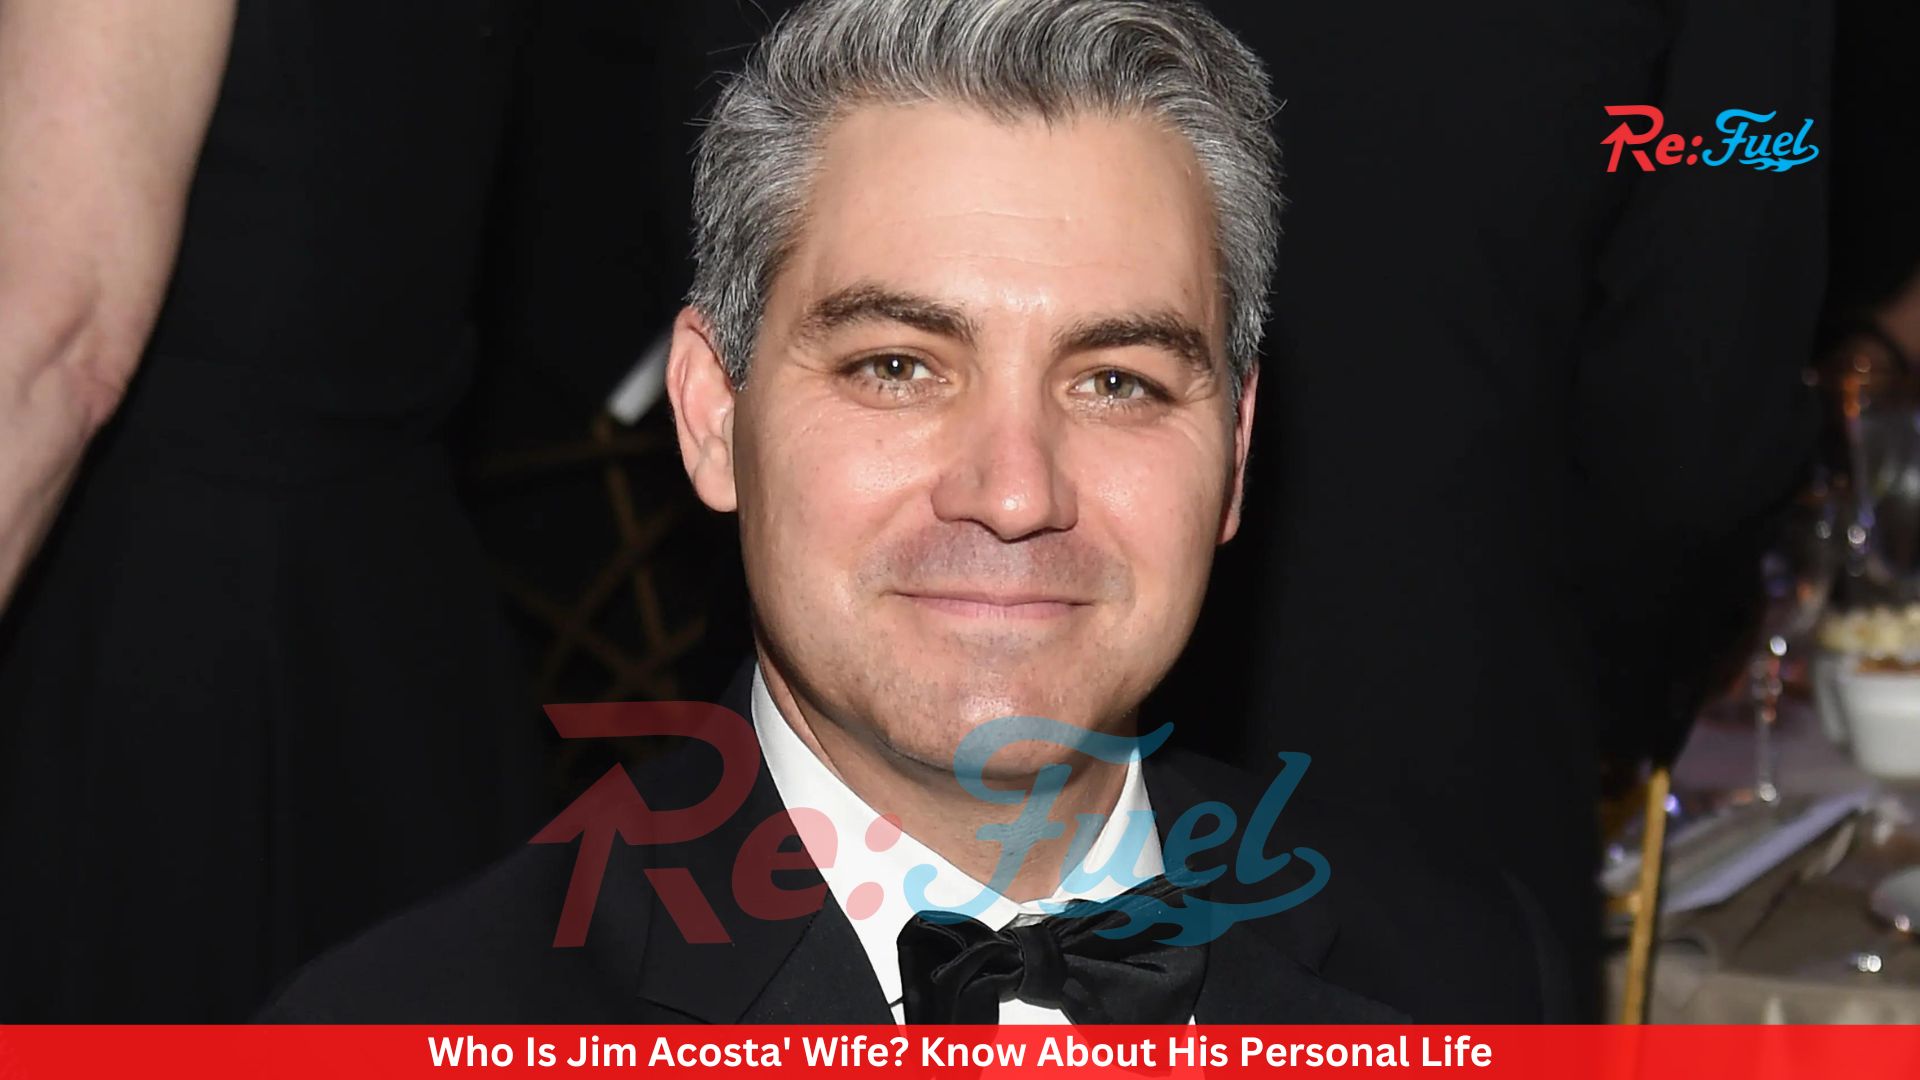 Who Is Jim Acosta' Wife? Know About His Personal Life